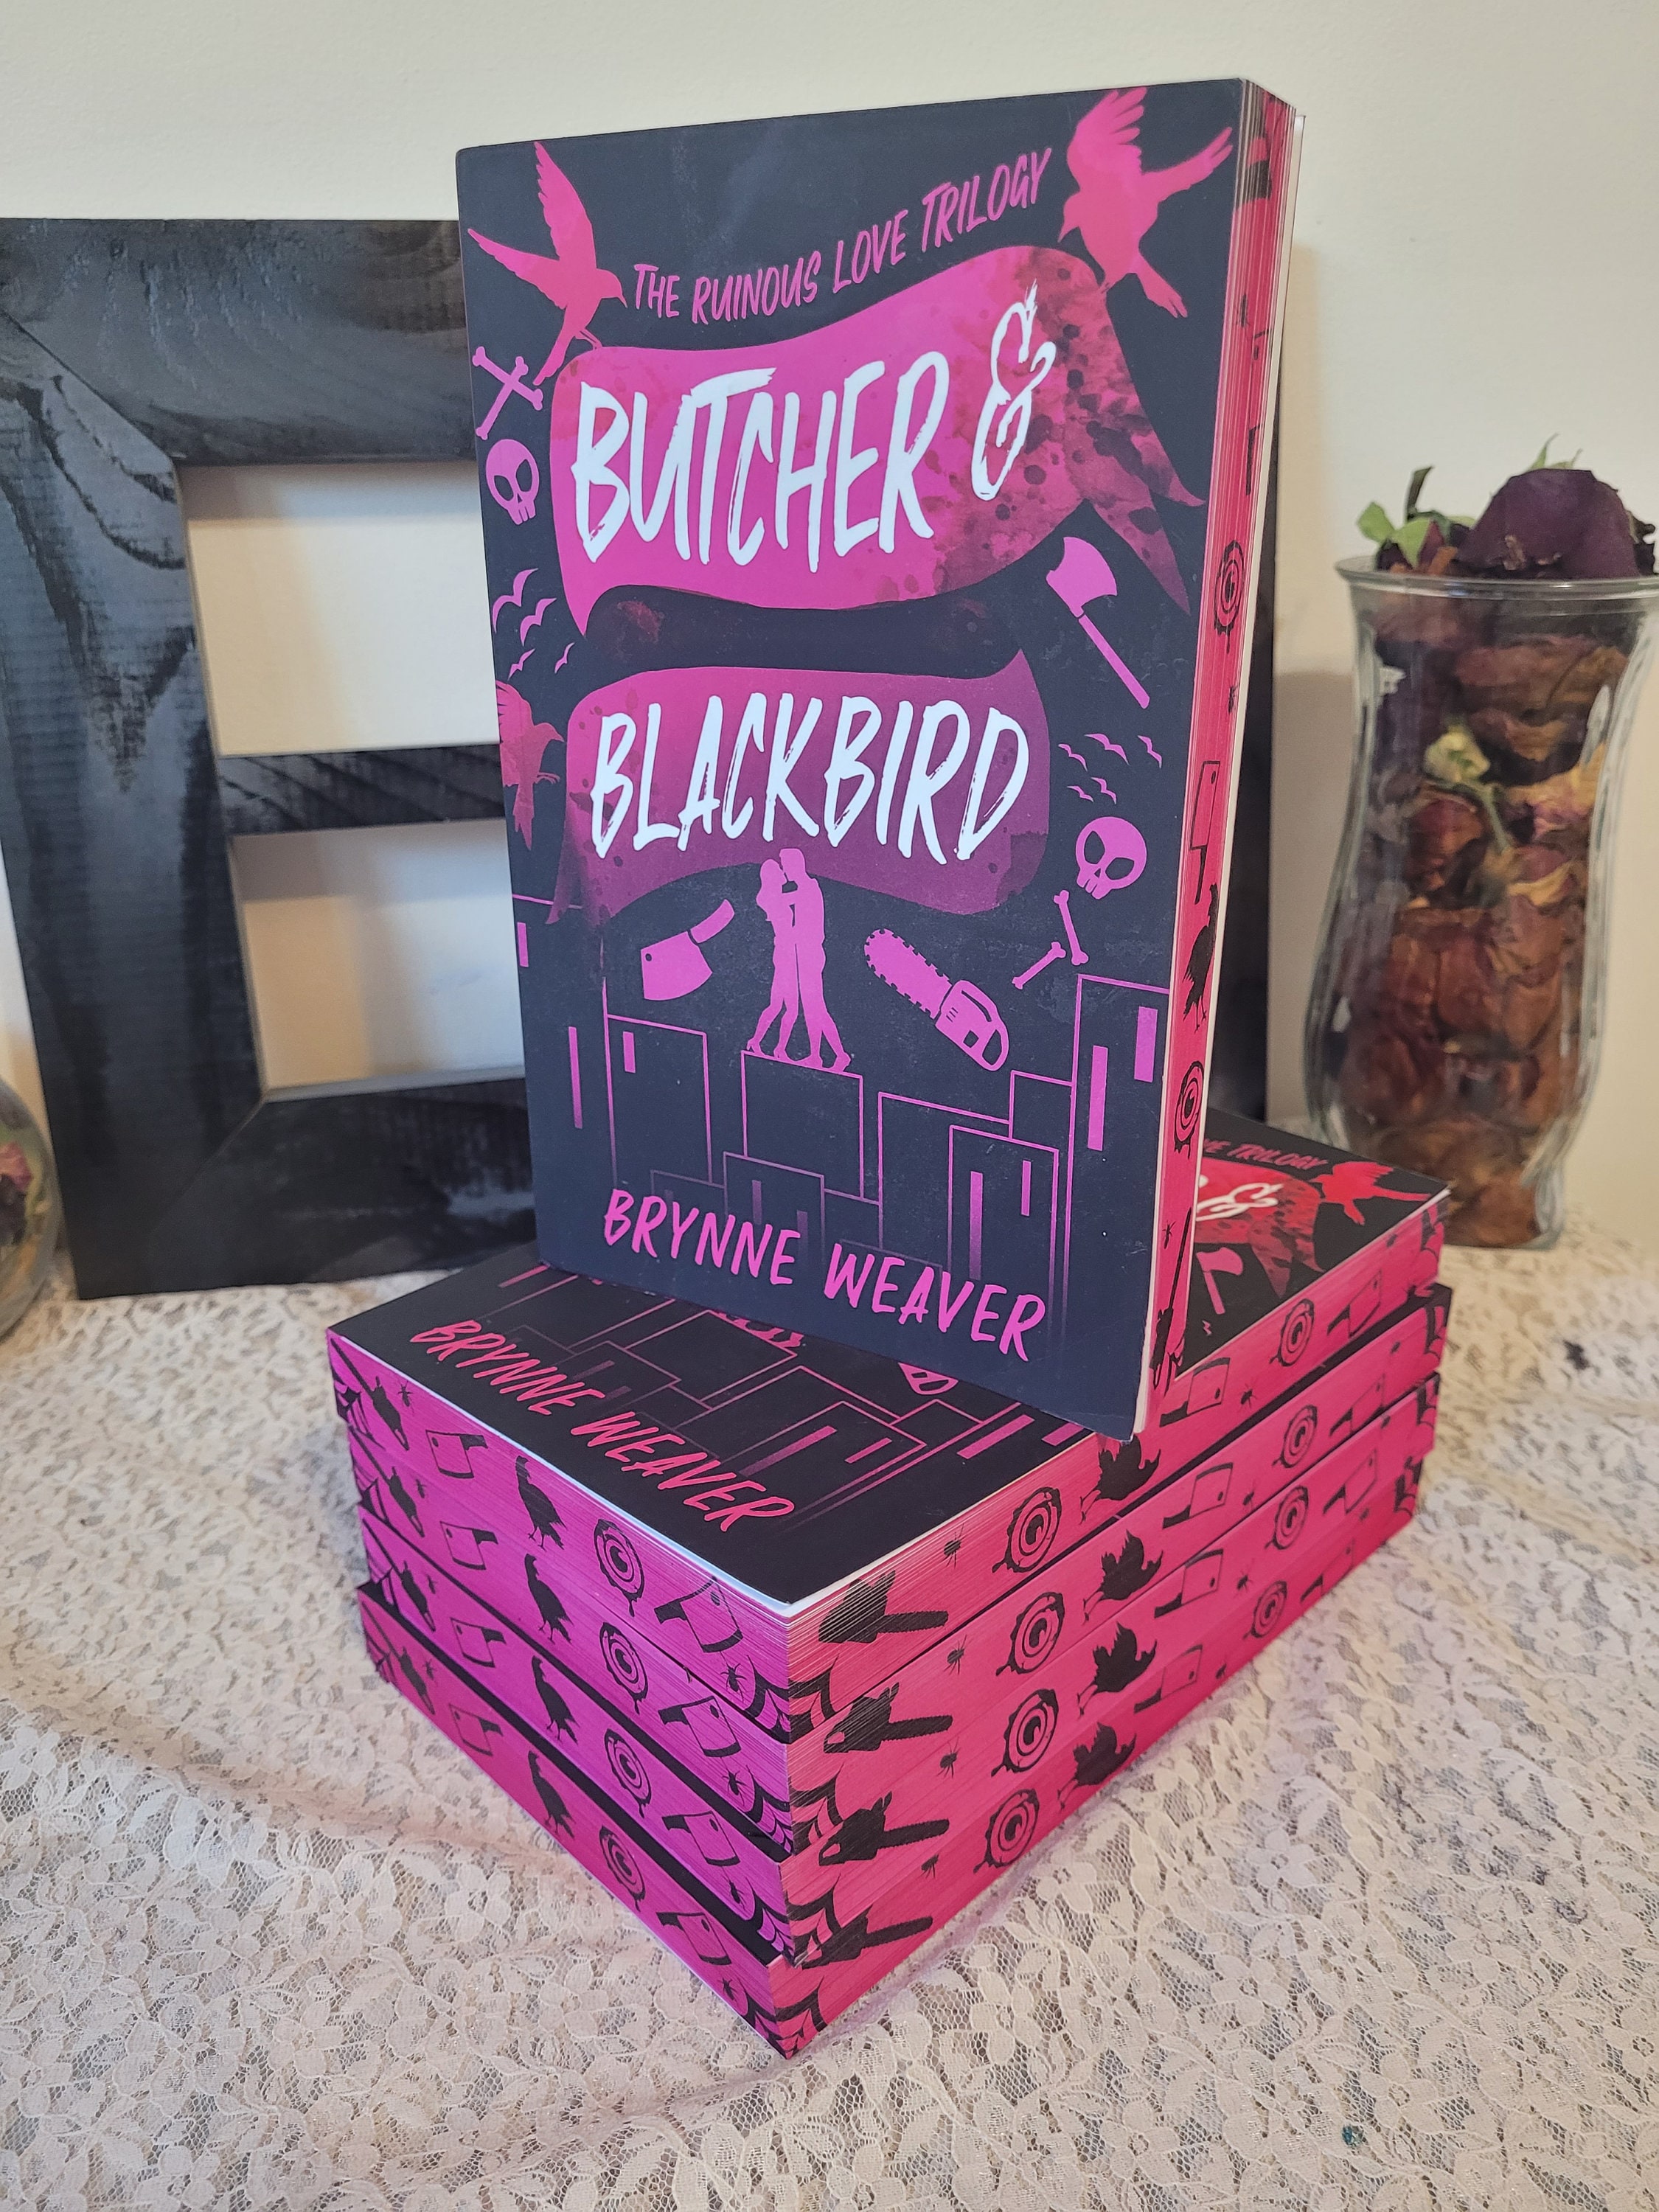 Butcher and Blackbird PAPERBACK by Brynne Weaver With Pretty